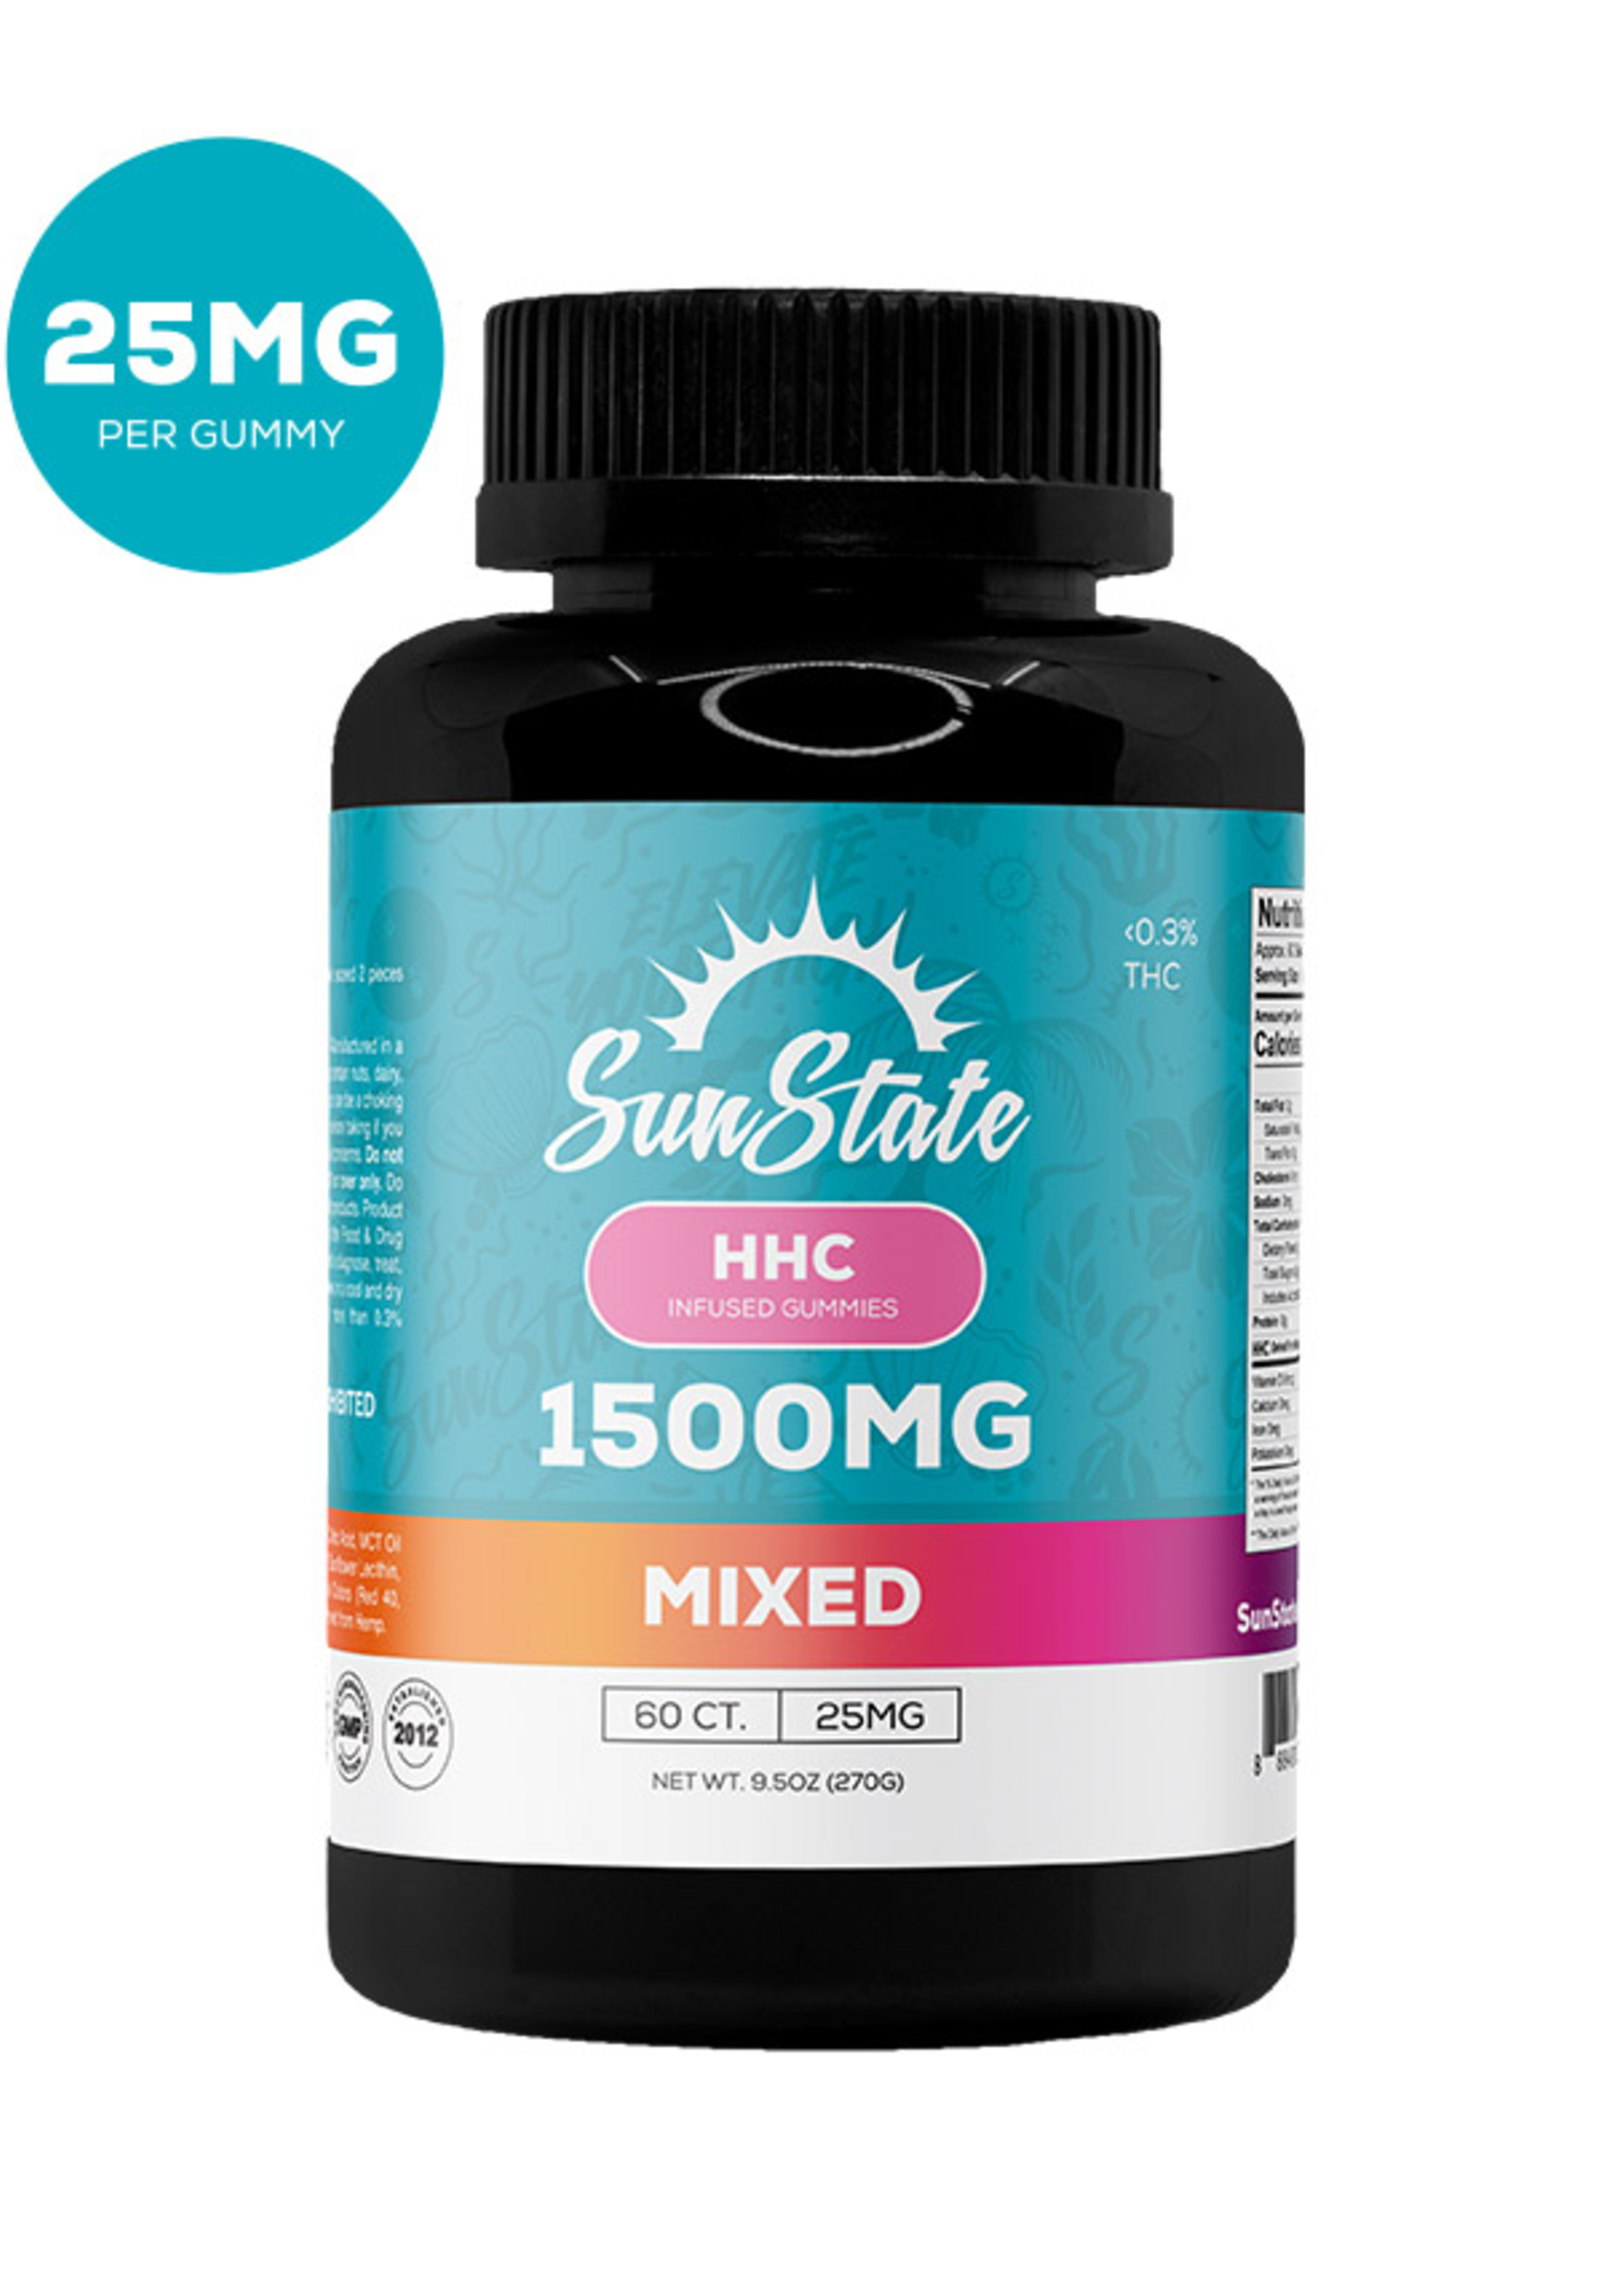 SUNSTATE SUNSTATE HHC INFUSED GUMMIES MIXED 1500MG